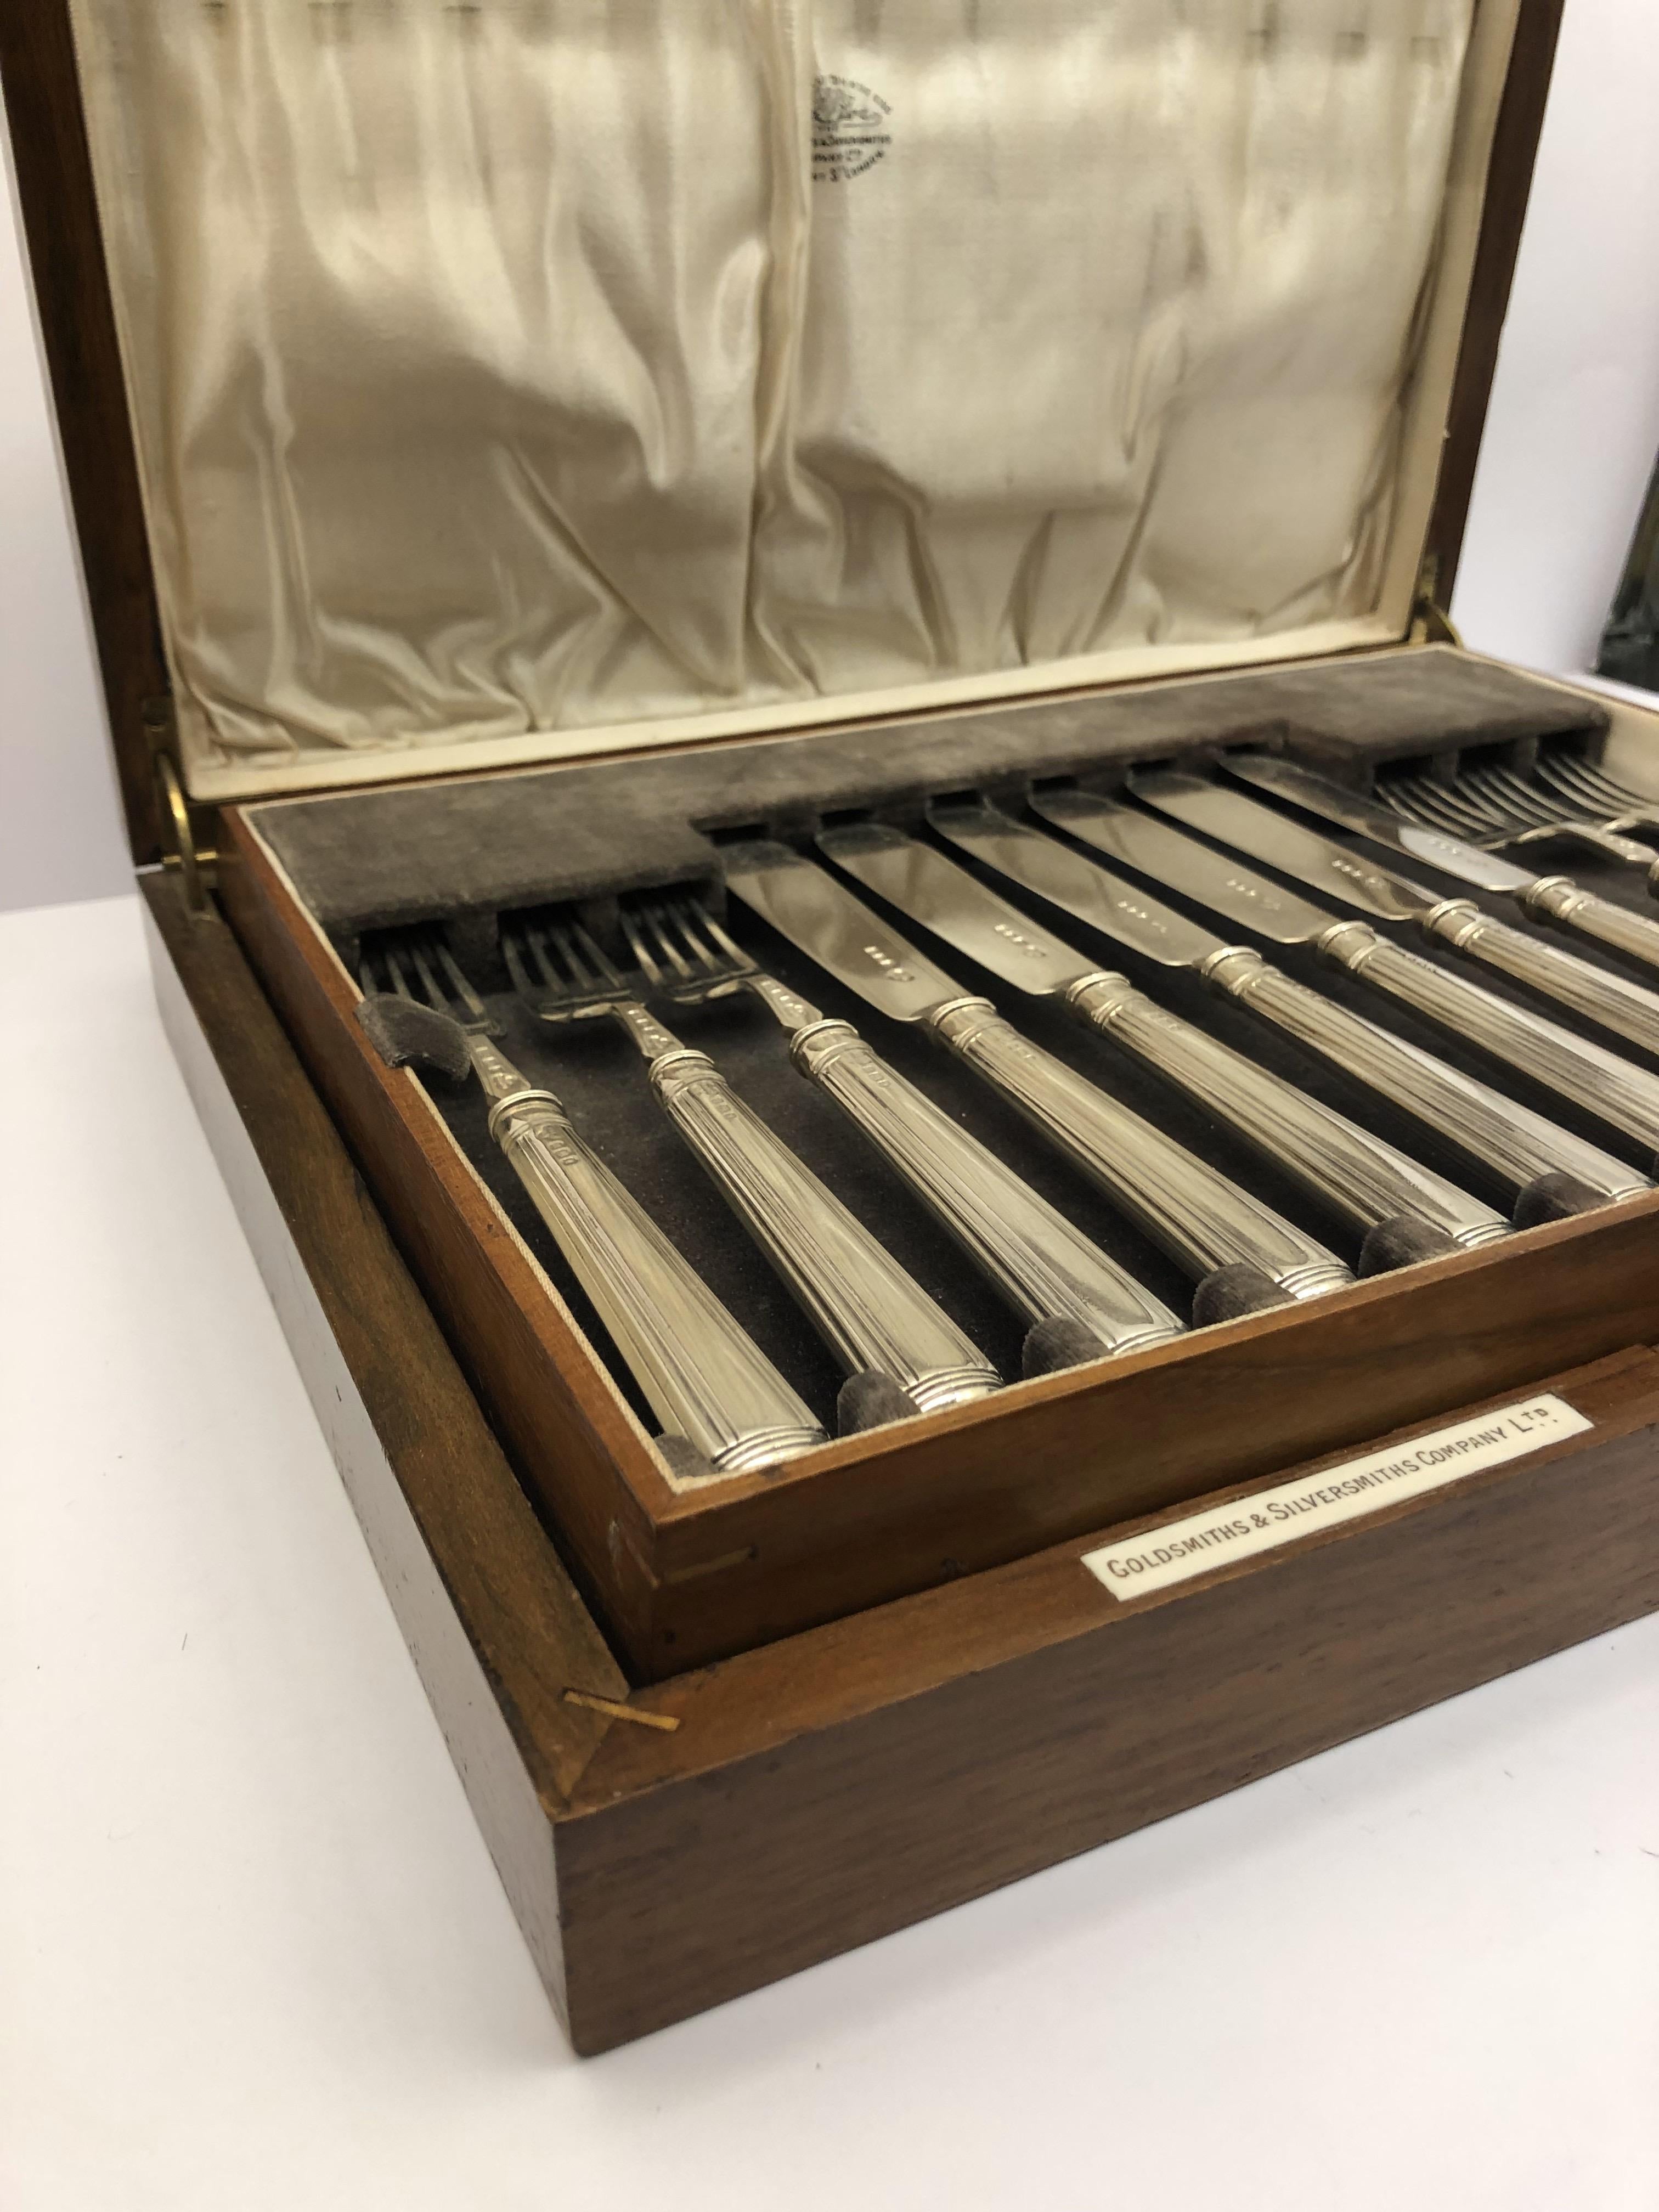 English 12 Piece Silver Cutlery Set by Goldsmiths & Silversmiths, London For Sale